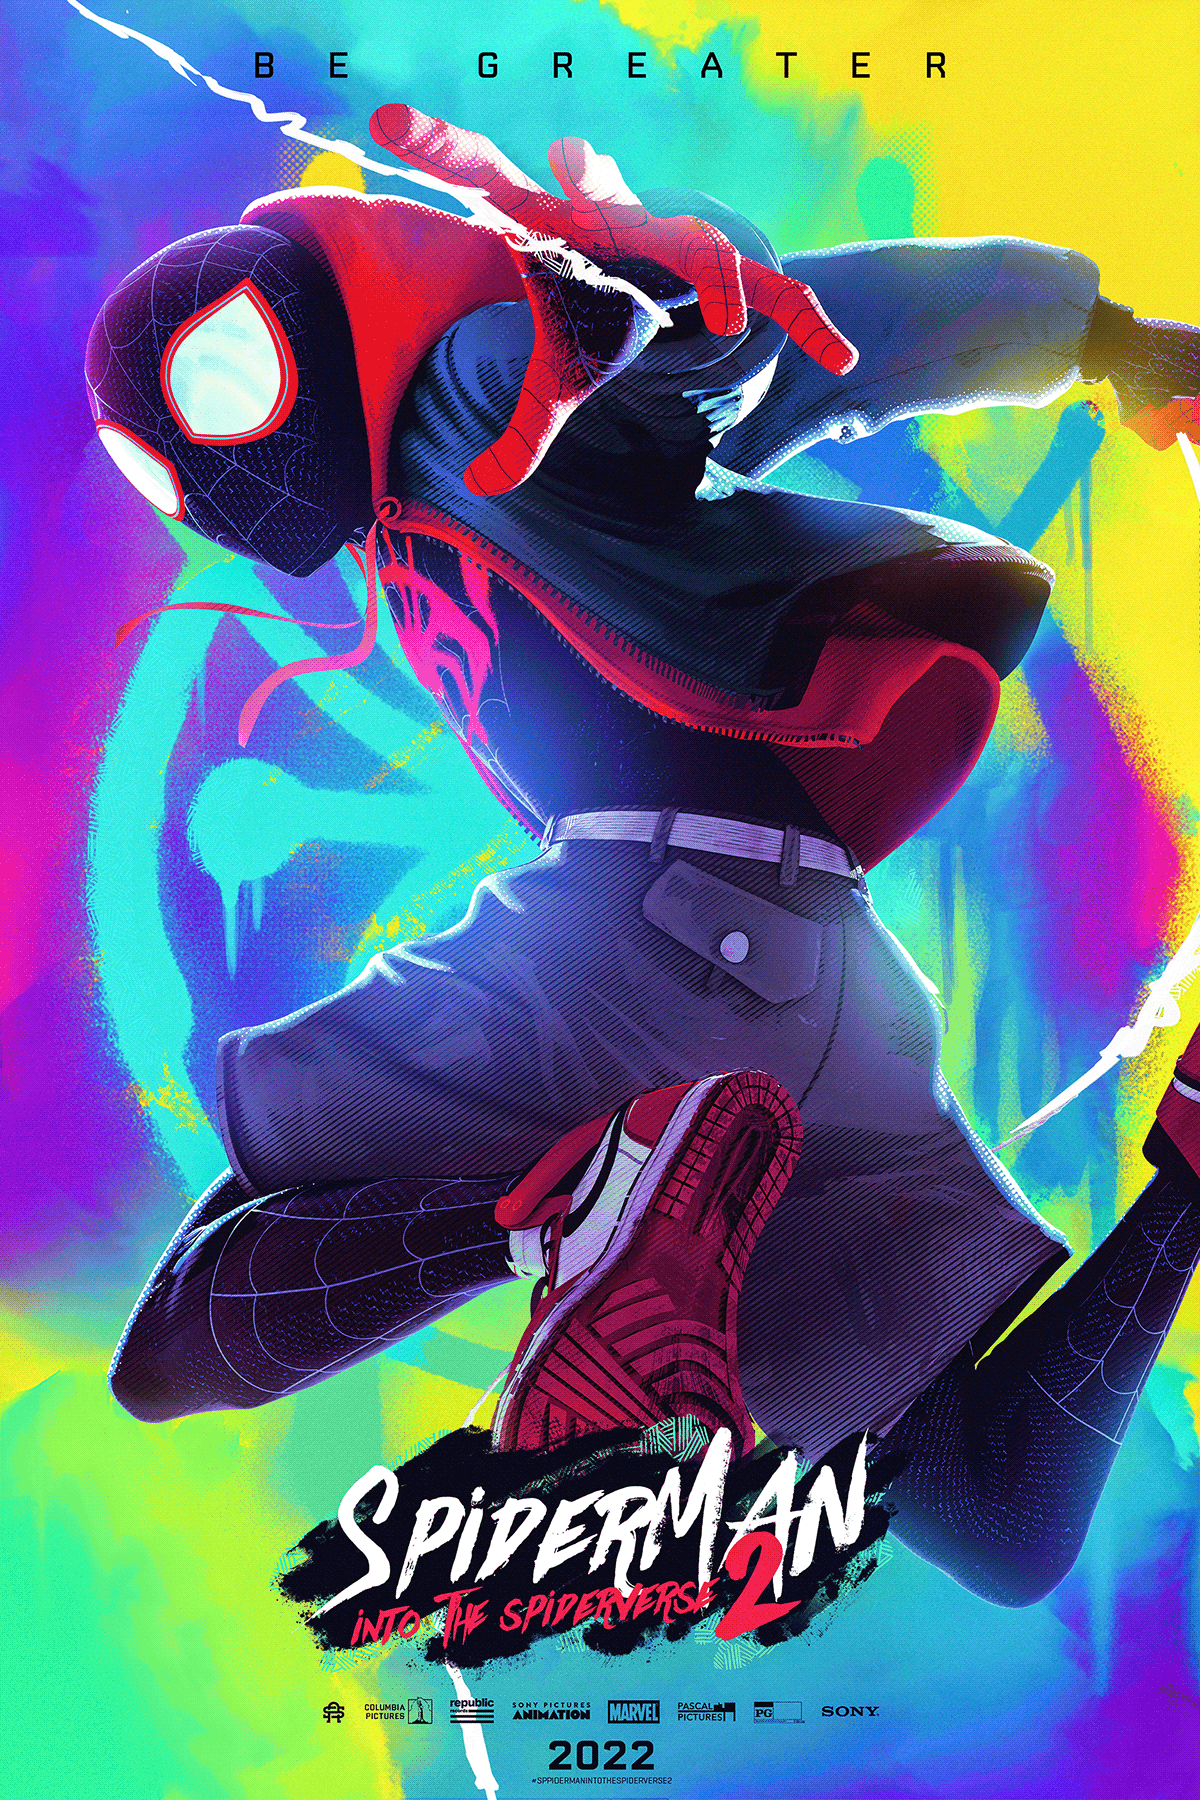 SpiderMan into the Spider-Verse 2 on Behance